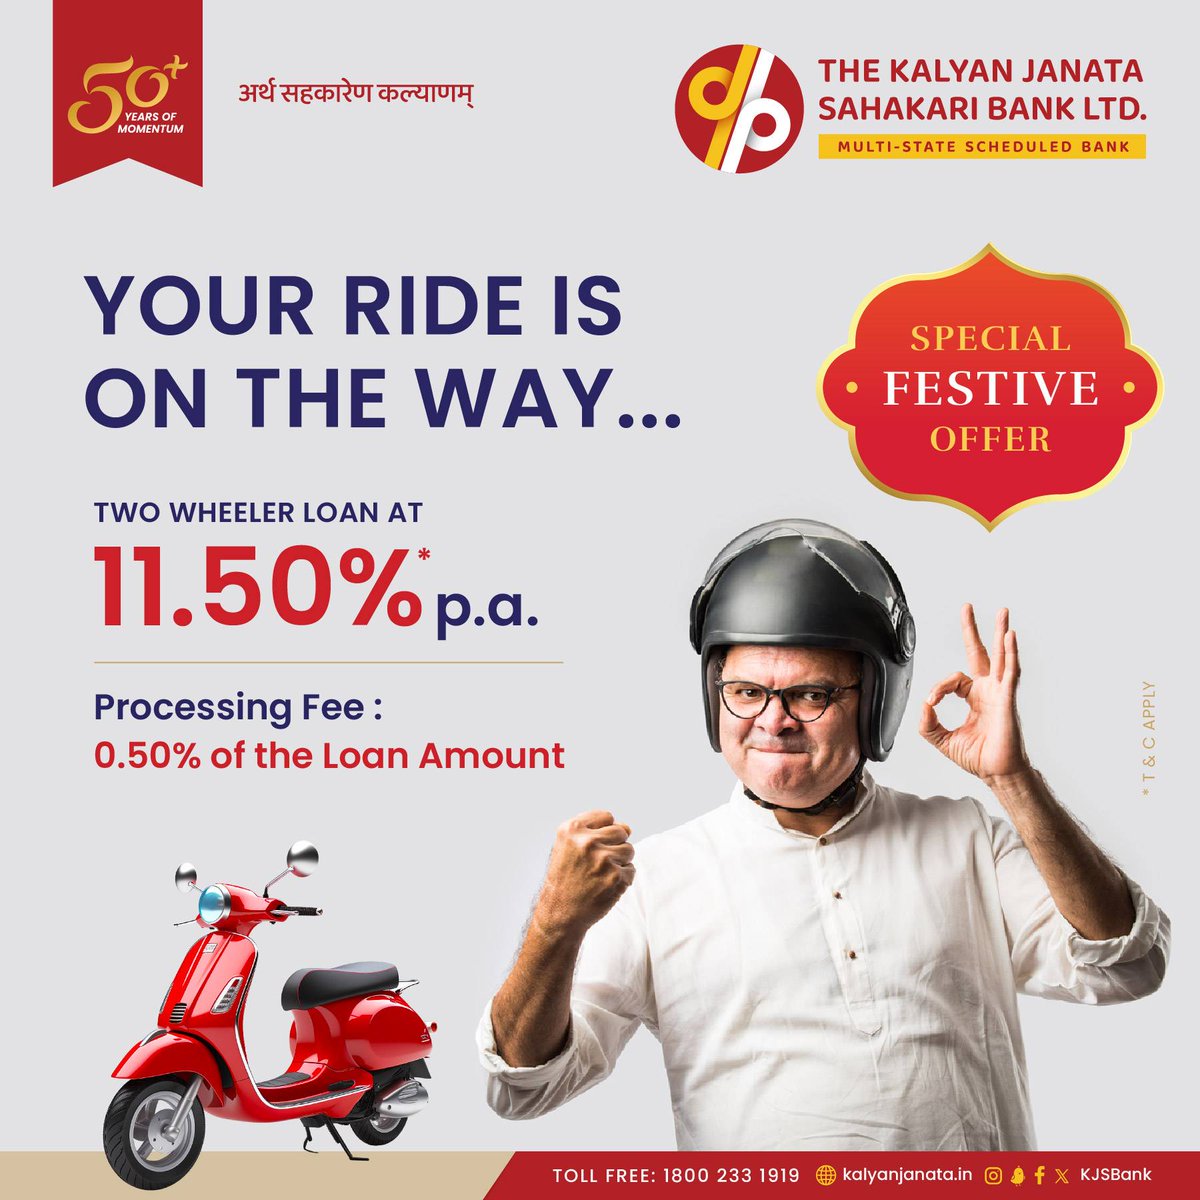 Ready to ride into your dreams?
Get on the fast lane with our Two-Wheeler Loans! Low interest rates, hassle-free application, and quick approval. 

#kalyanjanatasahakaribank #50yearsofmomentum #festiveoffer #twowheelerloan